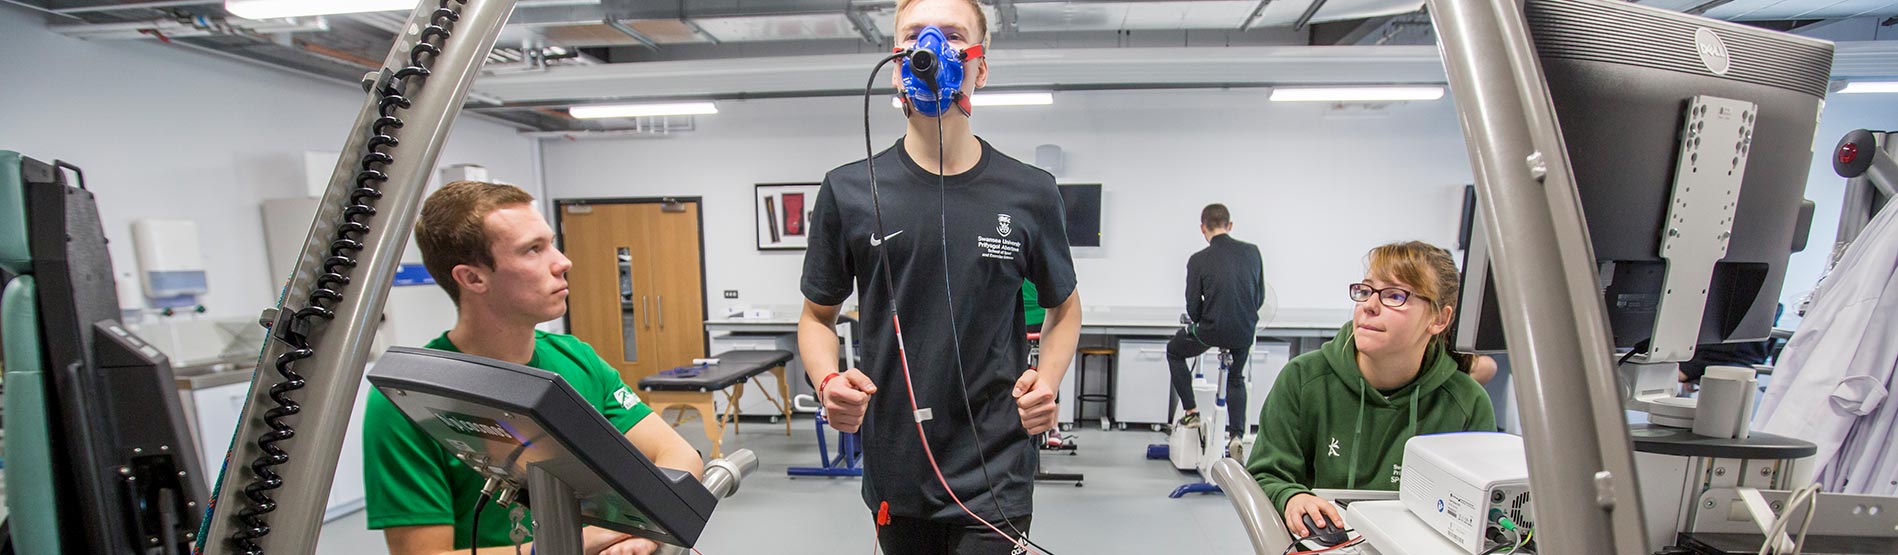 Sport and Exercise Sciences - Swansea University